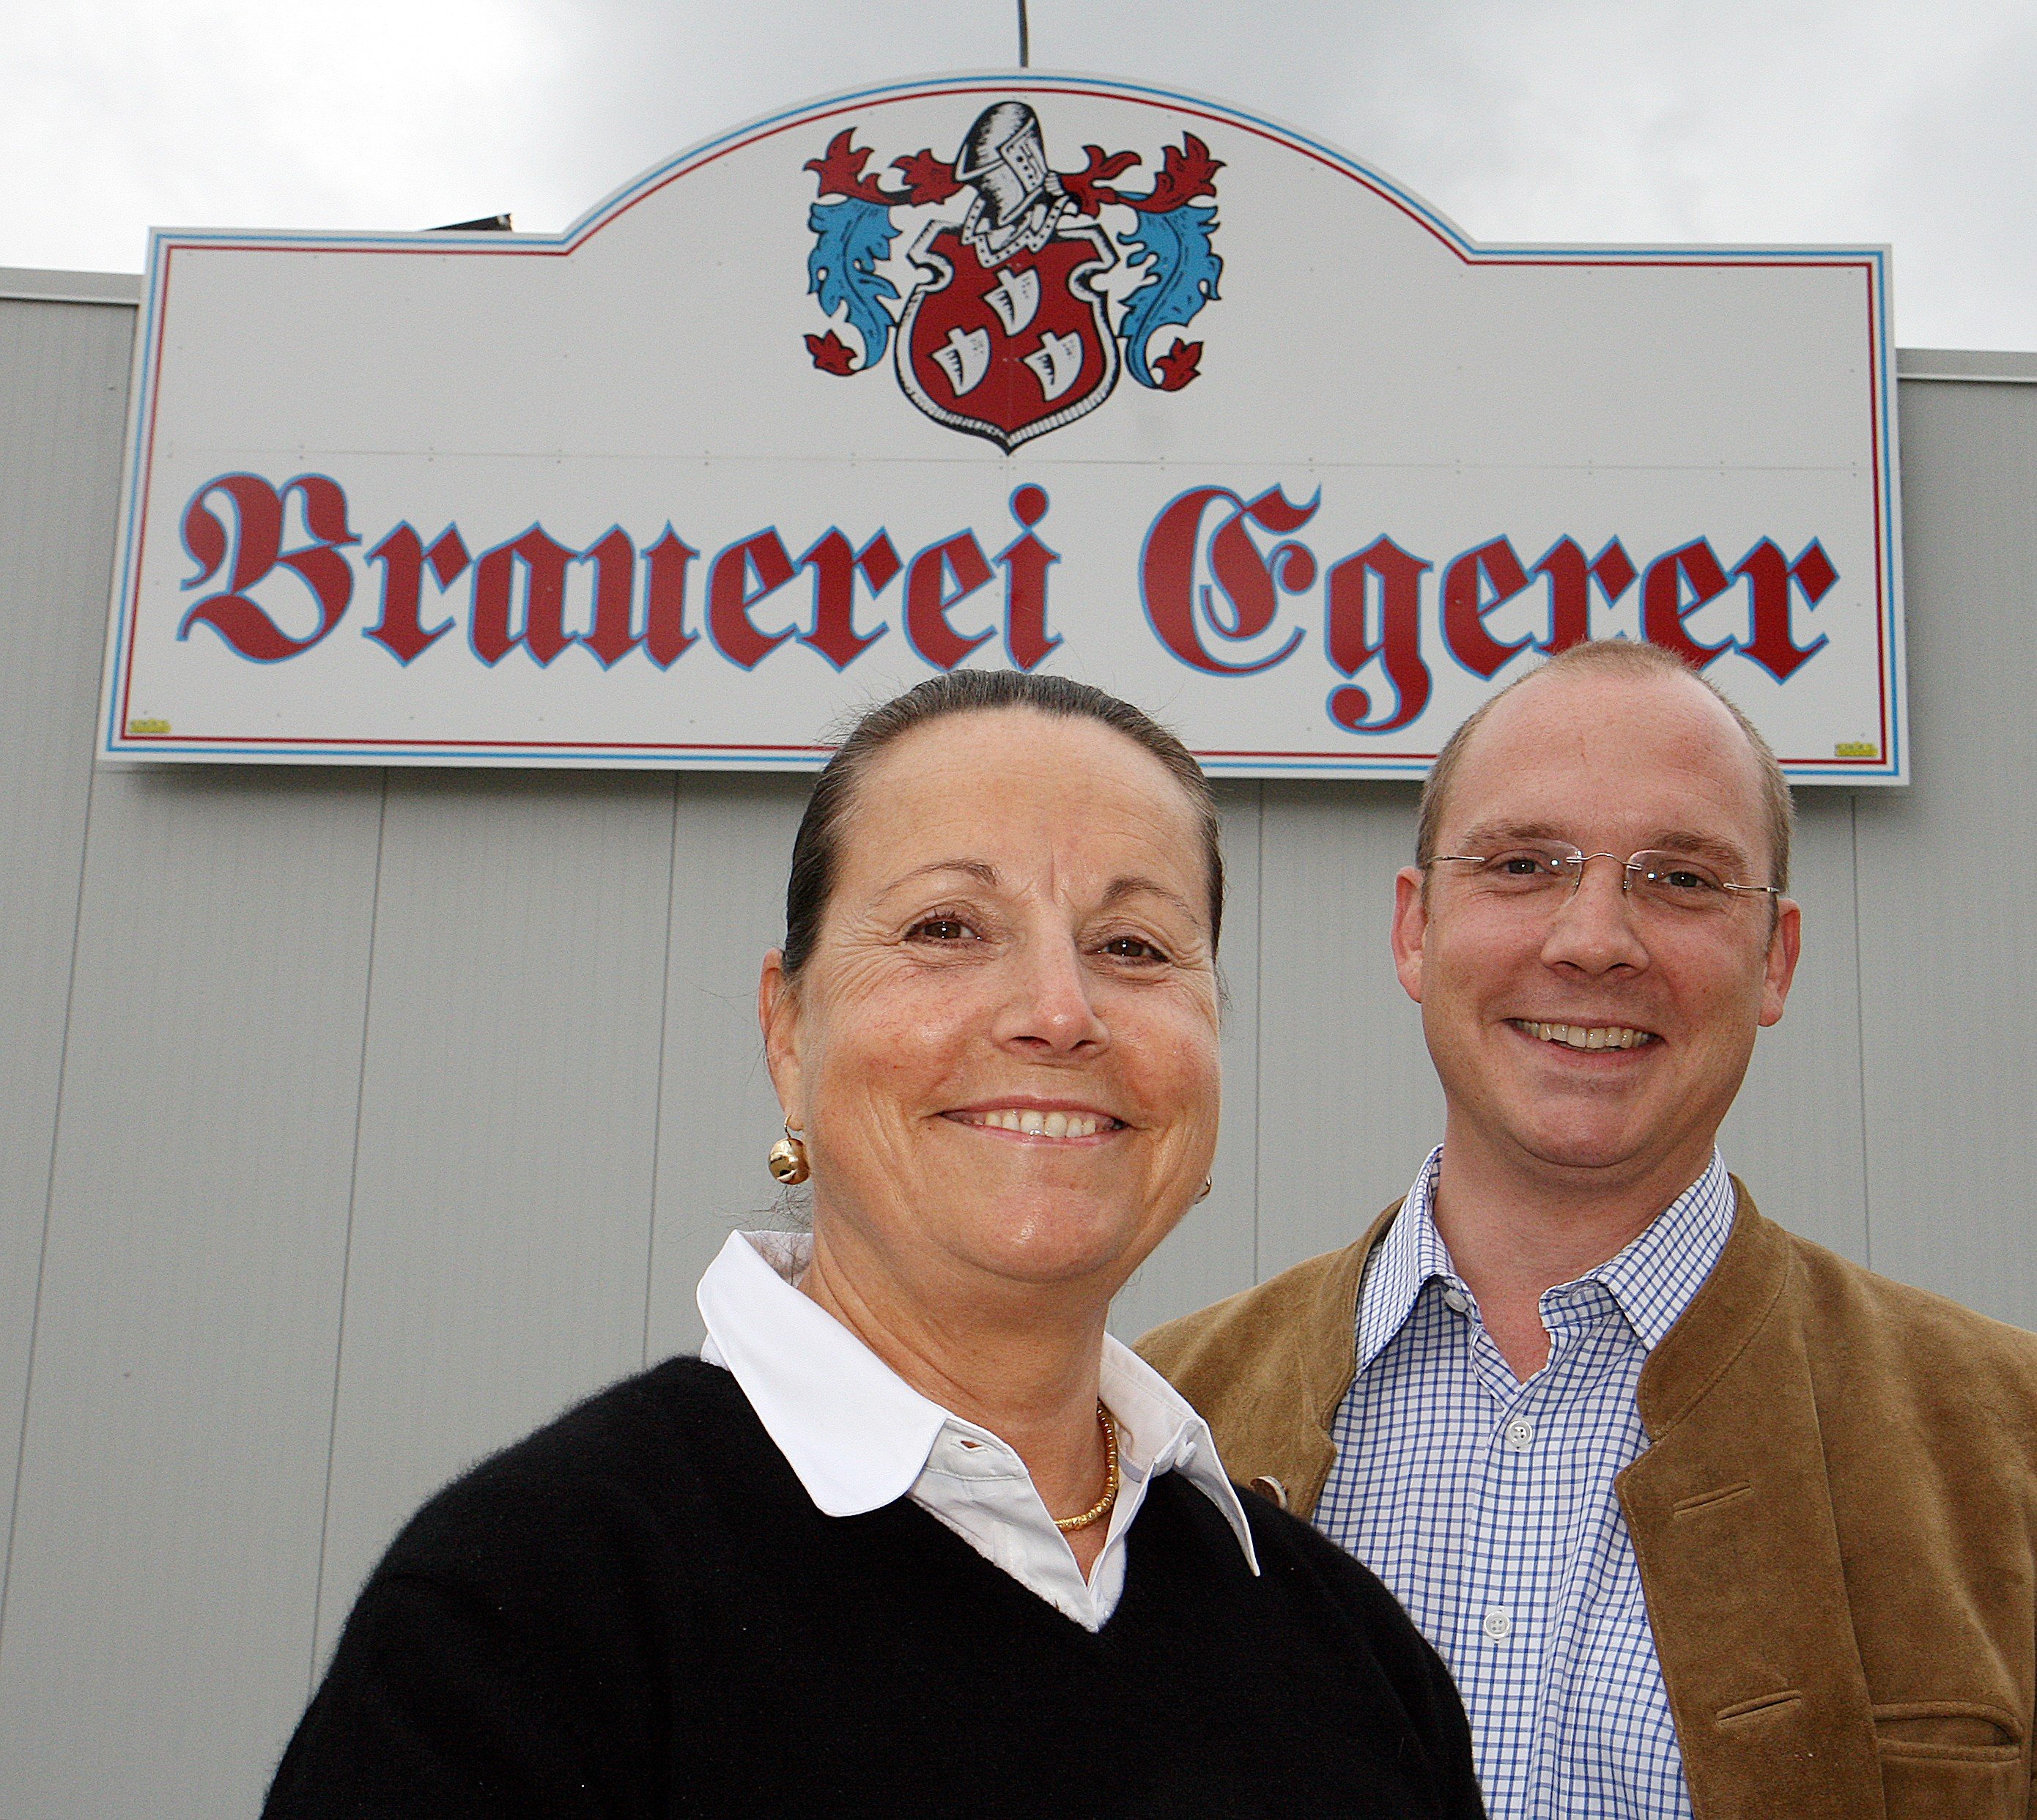 Privatbrauerei H. Egerer brewery from Germany